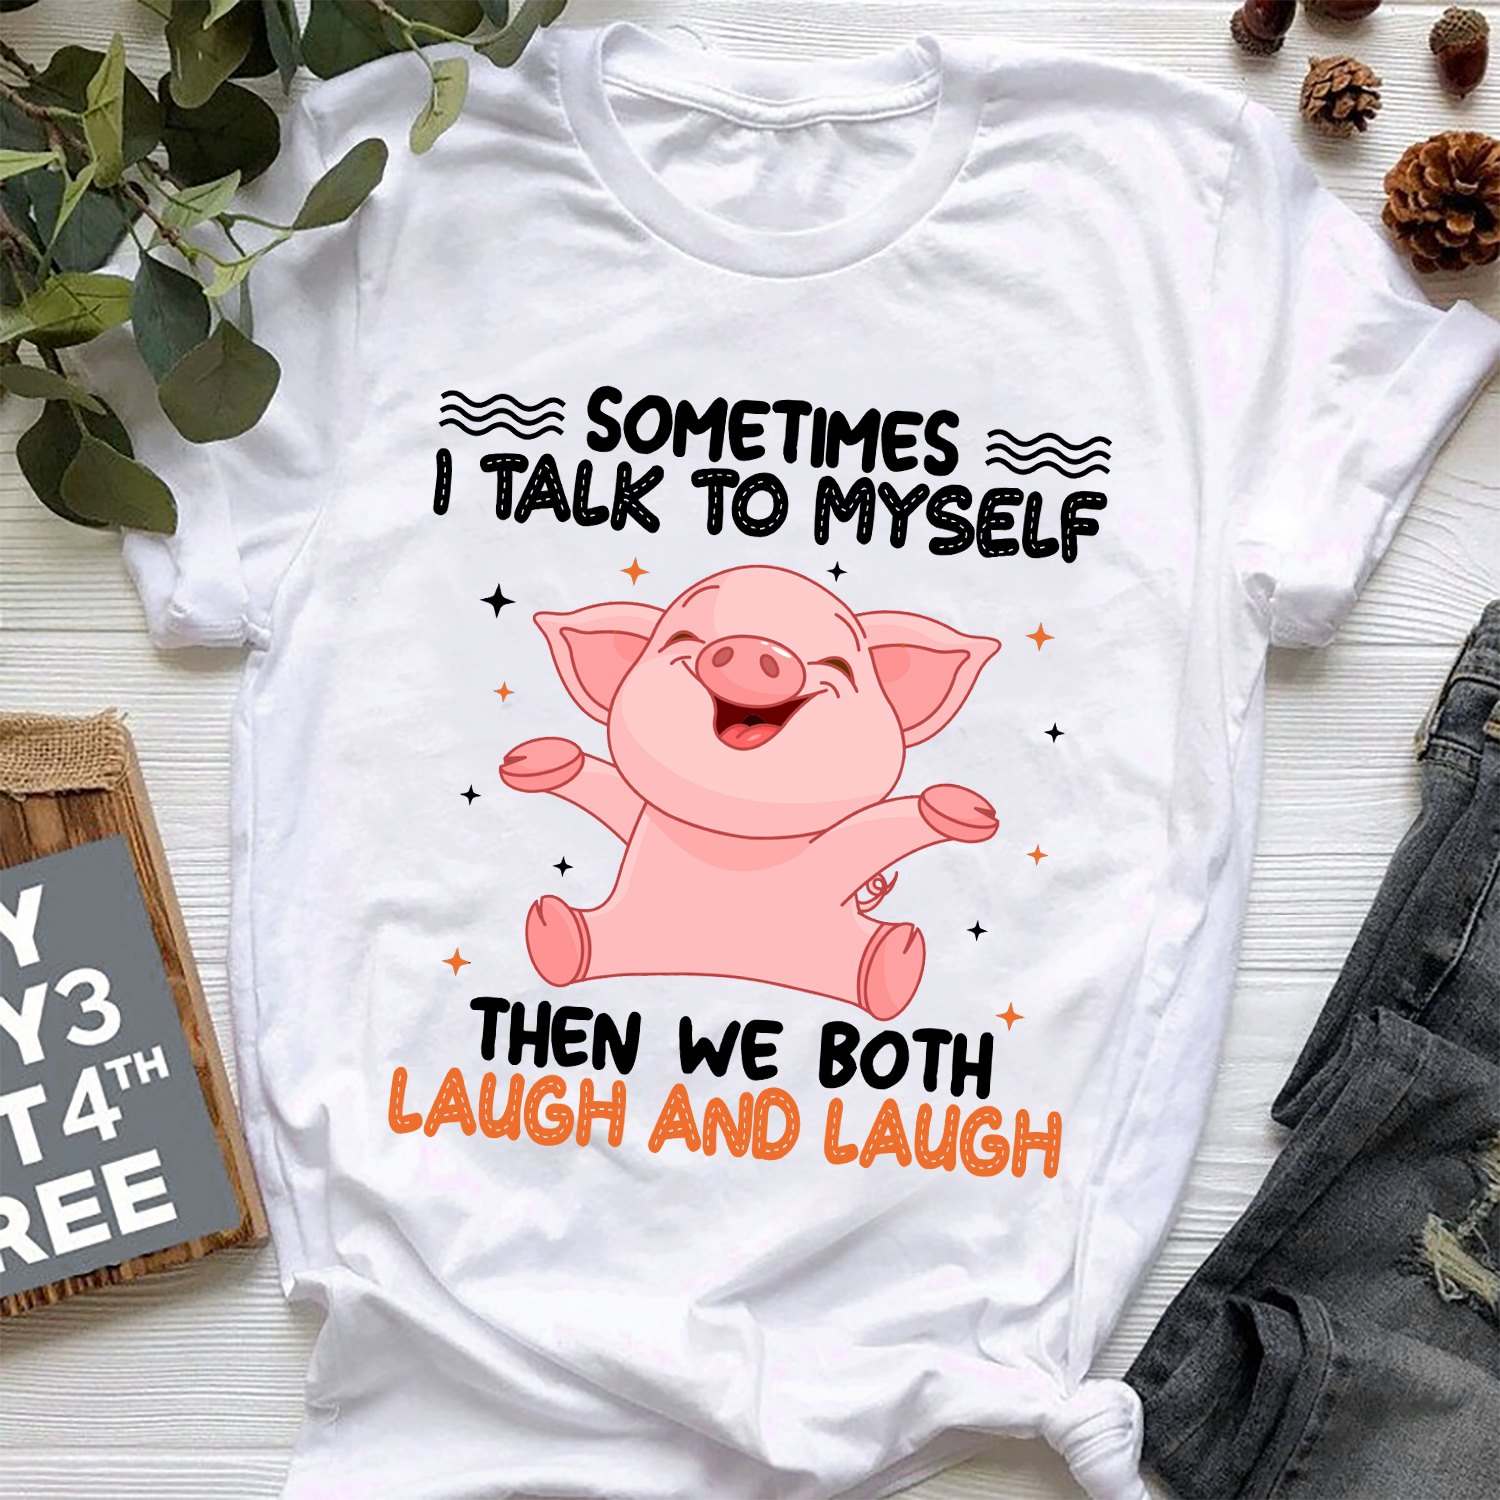 Funny Pig - Sometimes i talk to myself then we both laugh and laugh